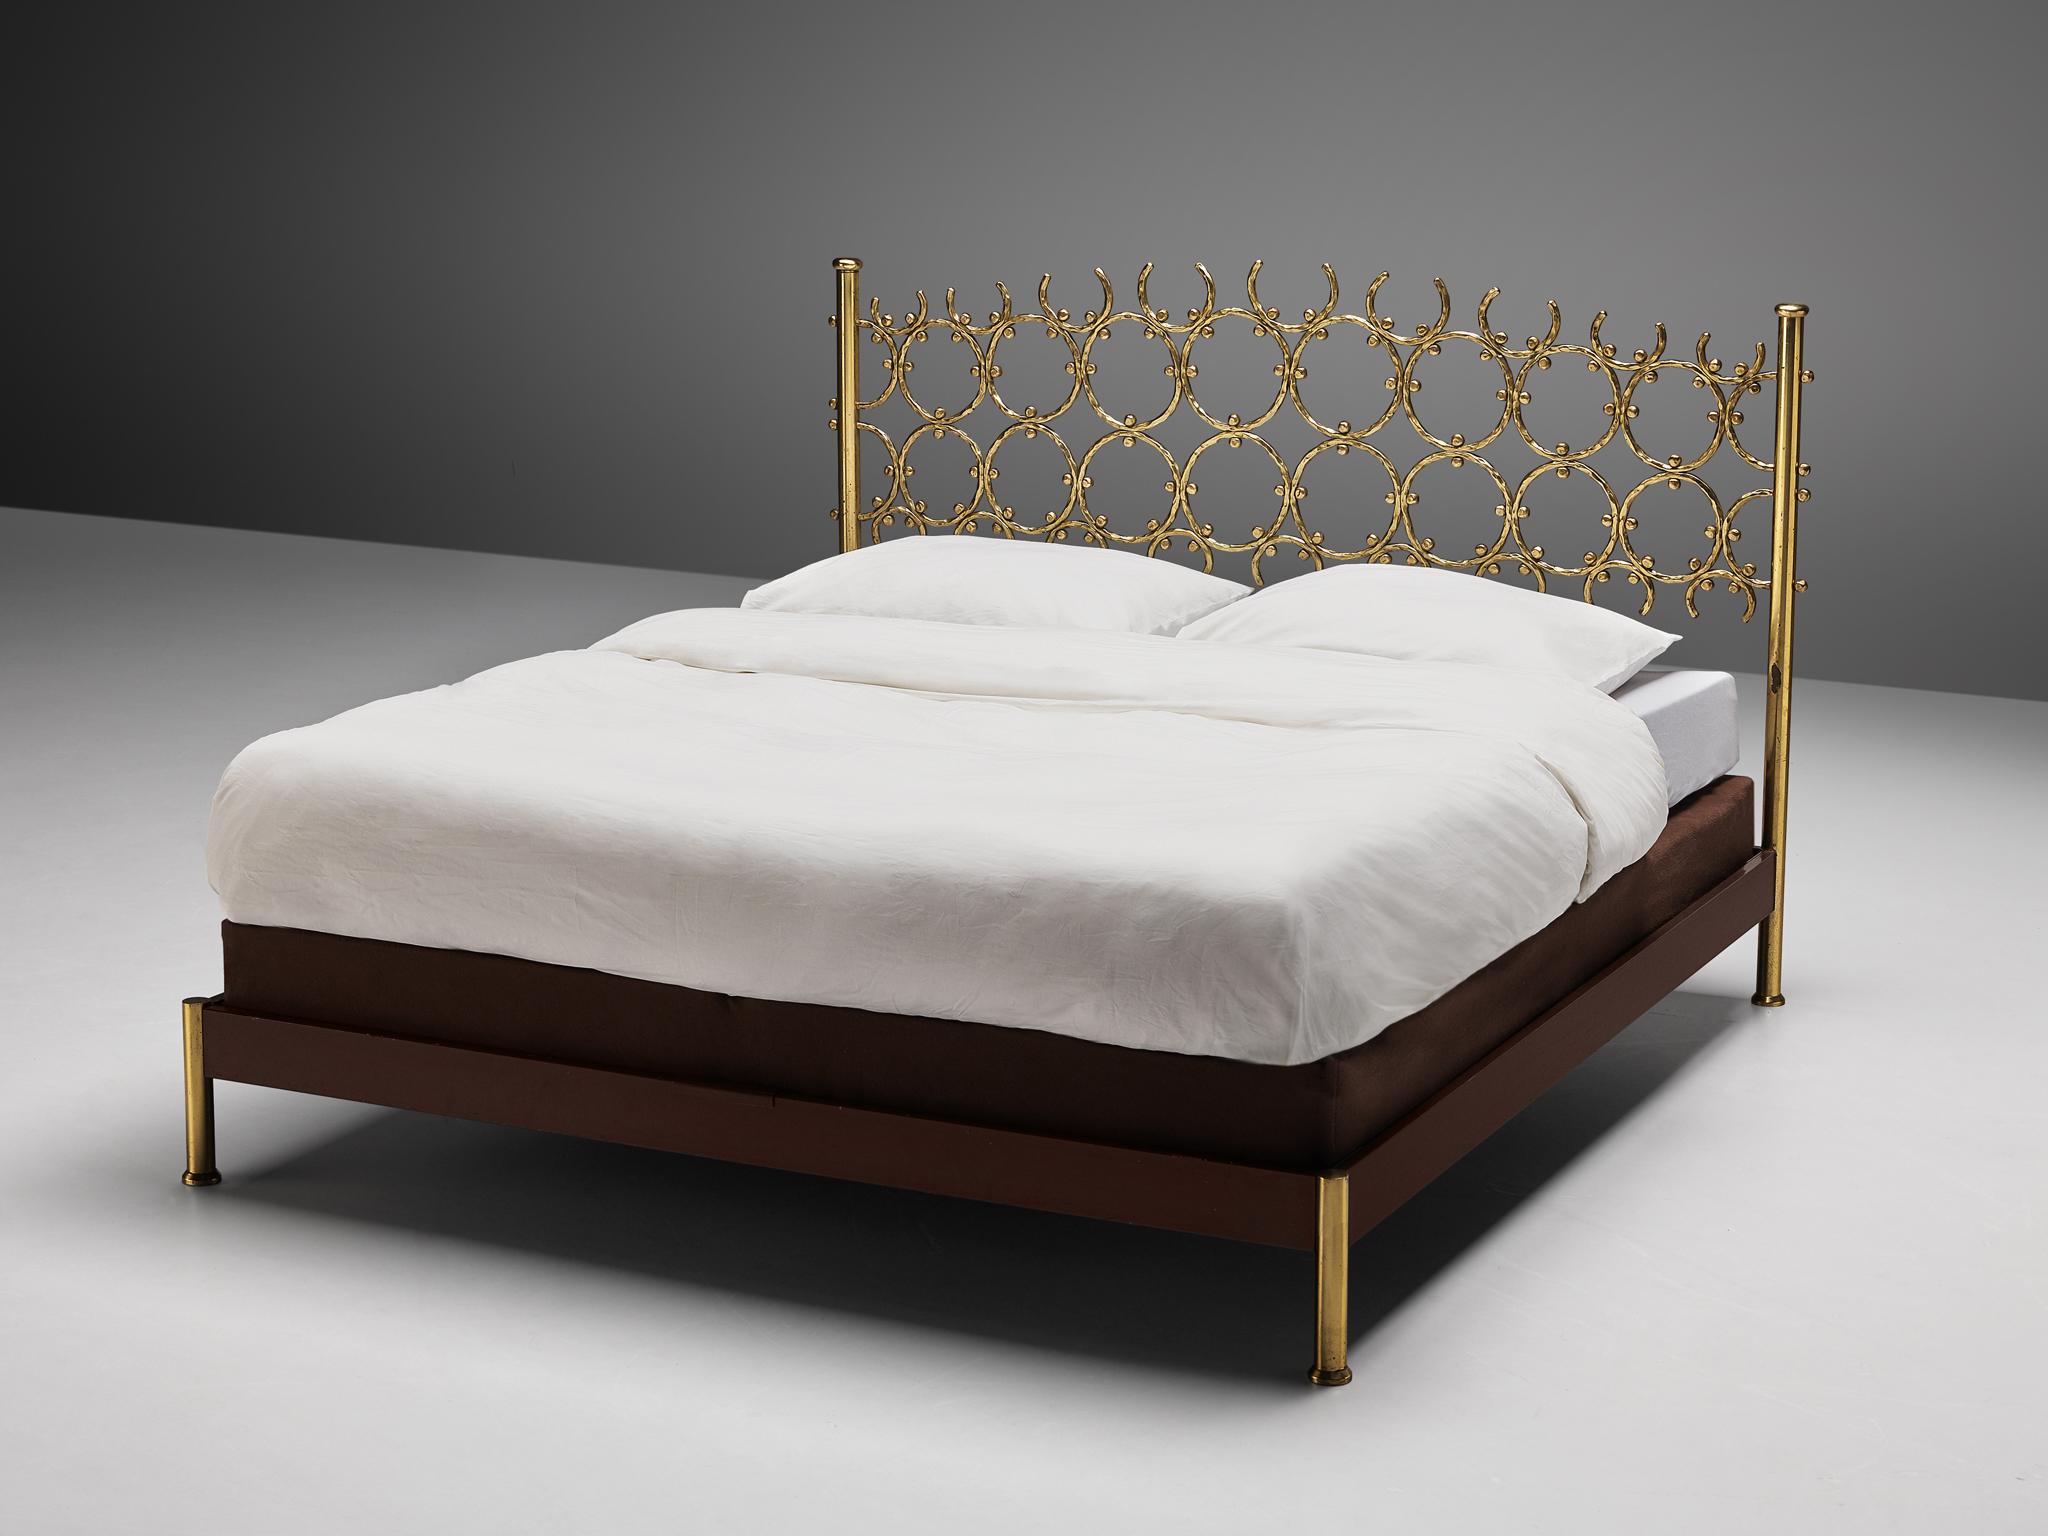 Osvaldo Borsani and Arnaldo Pomodoro, queen size bed, brass and steel, Italy, circa 1960.

A rare and elegant bed with headboard from the Italian designer Osvaldo Borsani and sculptor Arnaldo Pomodoro. Between 1958 and 1962, Borsani and Pomodoro